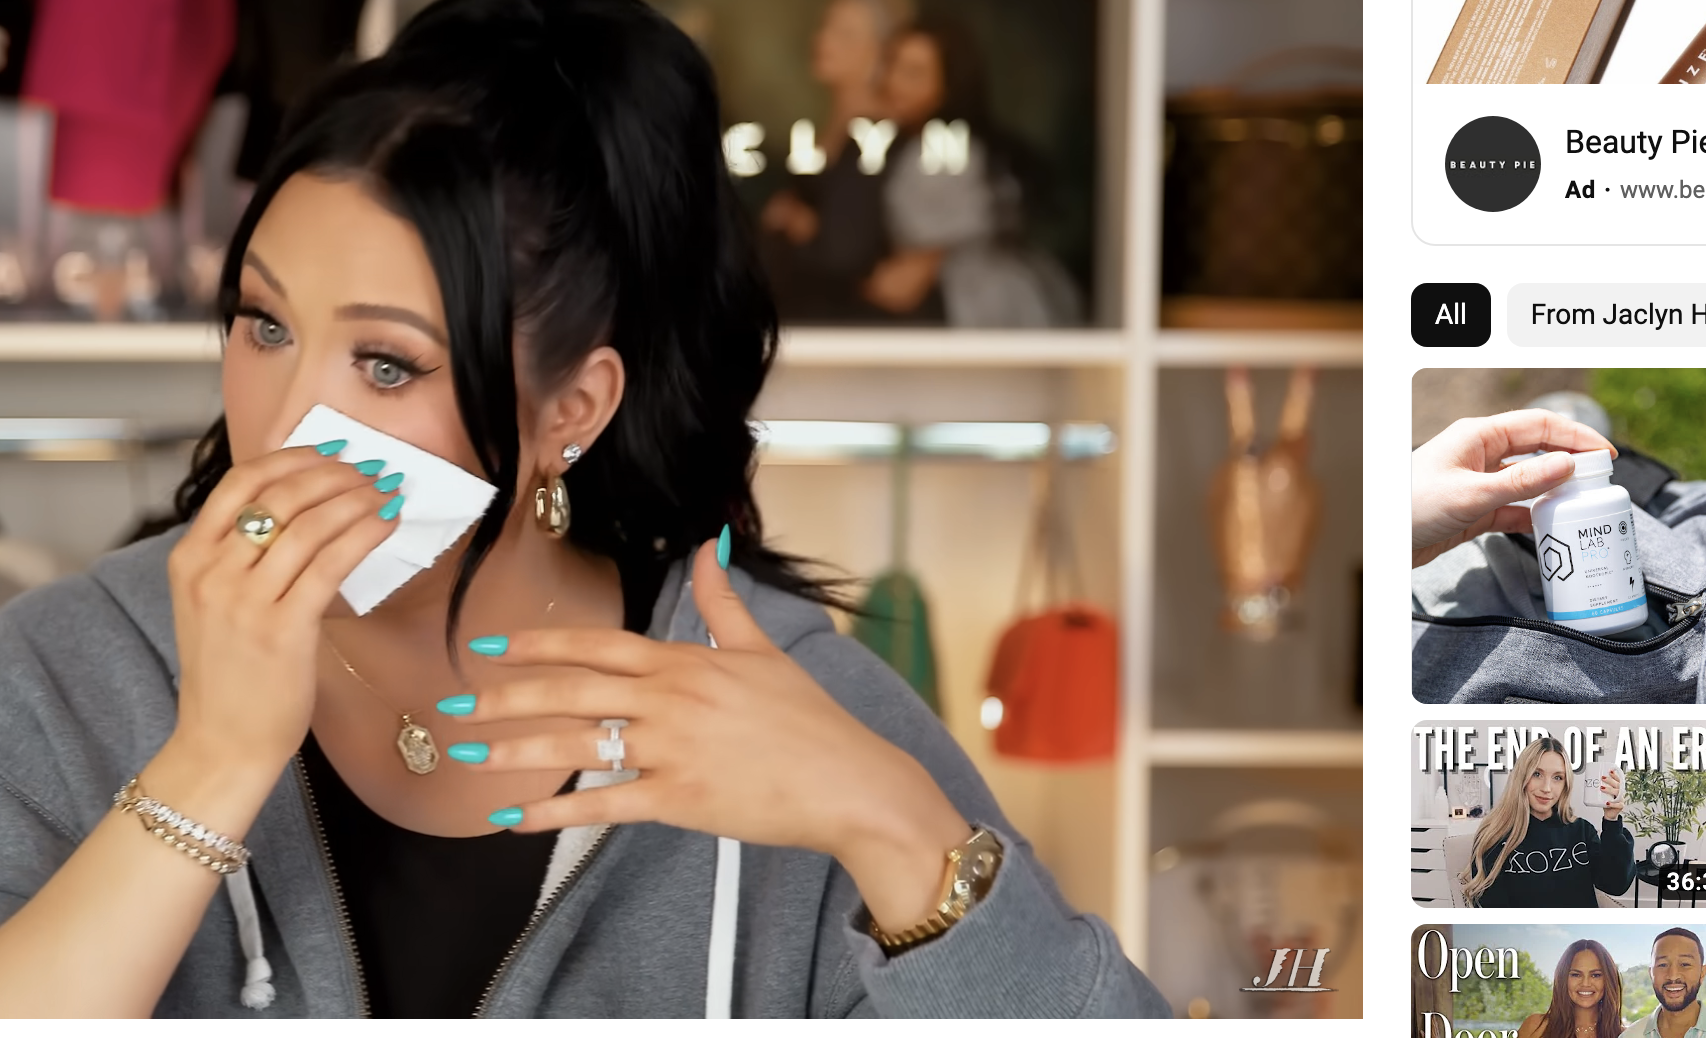 Jaclyn Hill Reflects On Lipstick Controversy, Shuts Down Brands